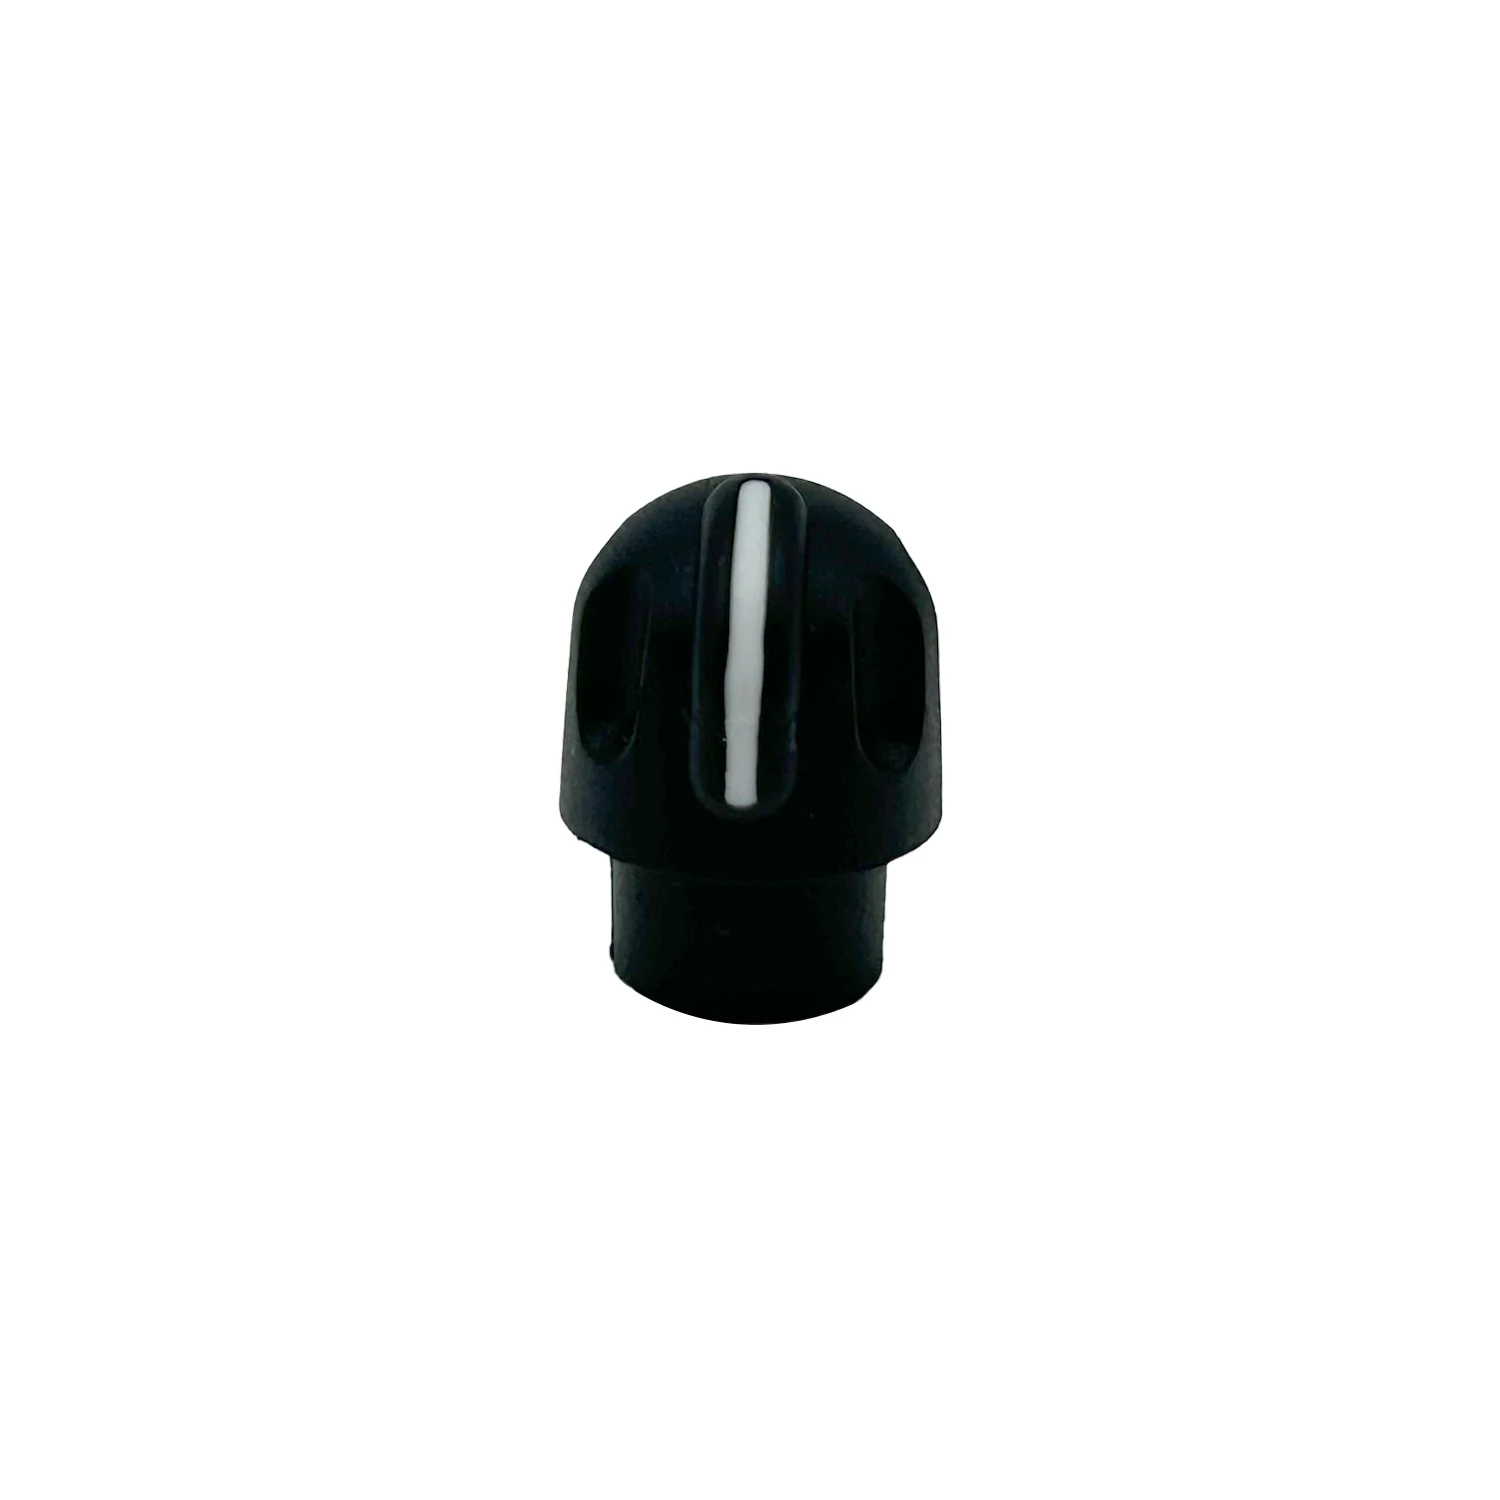 Walkie Talkie Replacement  Channel Knob For APX6000 Two Way Radio Accessories